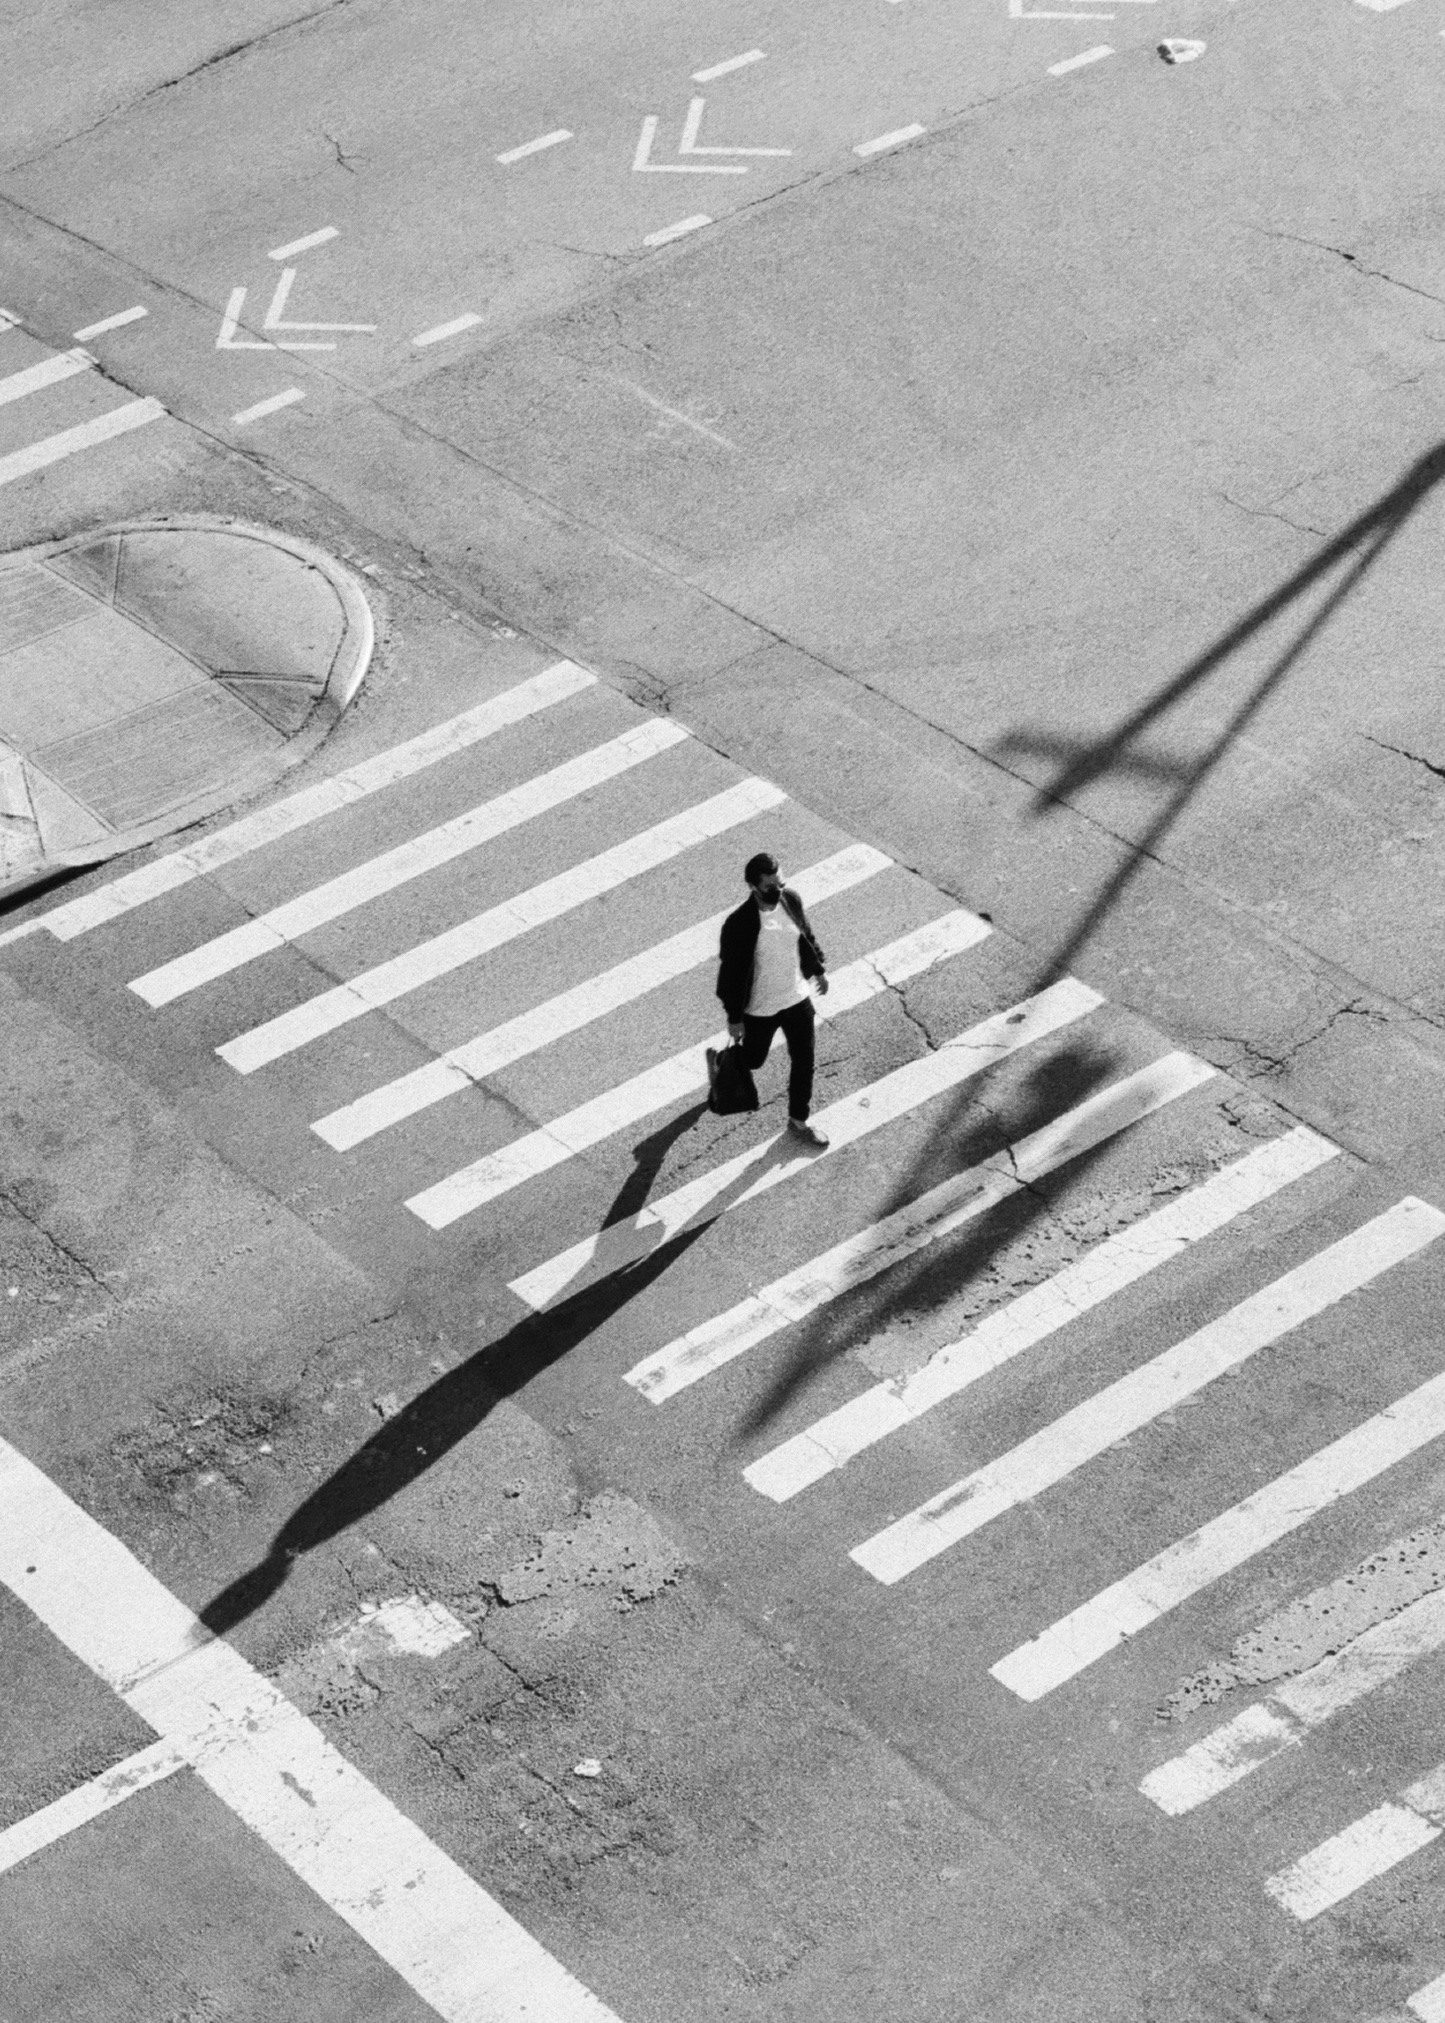 Pedestrian on zebra crossing shot on ILFORD HP5 plus black and white film by Louis Kassam